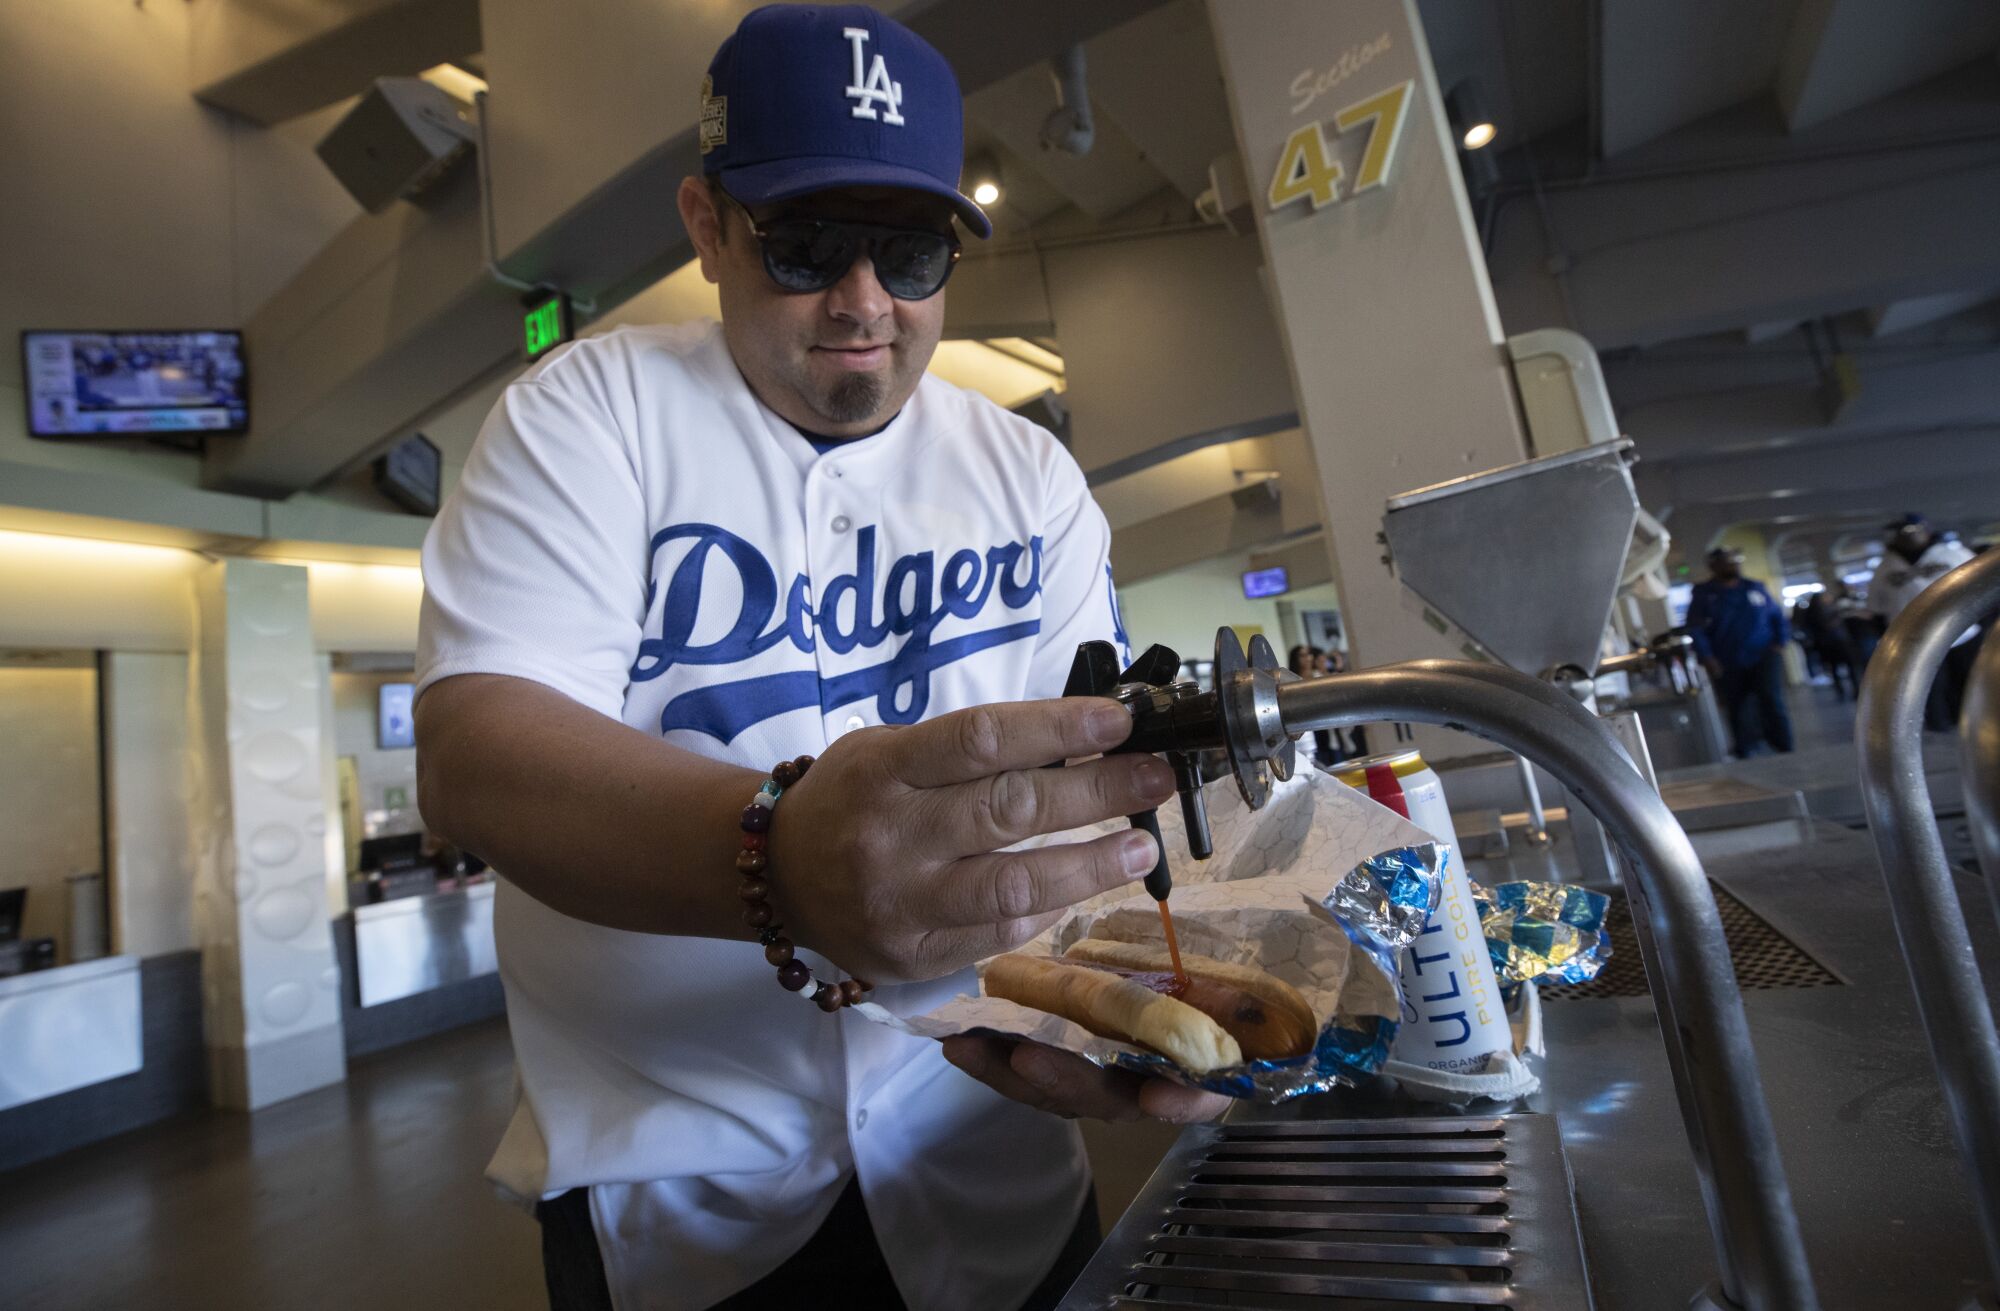 Dodgers fan Carlos Aranibar prepares his Dodger dogs while attending the team's home opener with family.